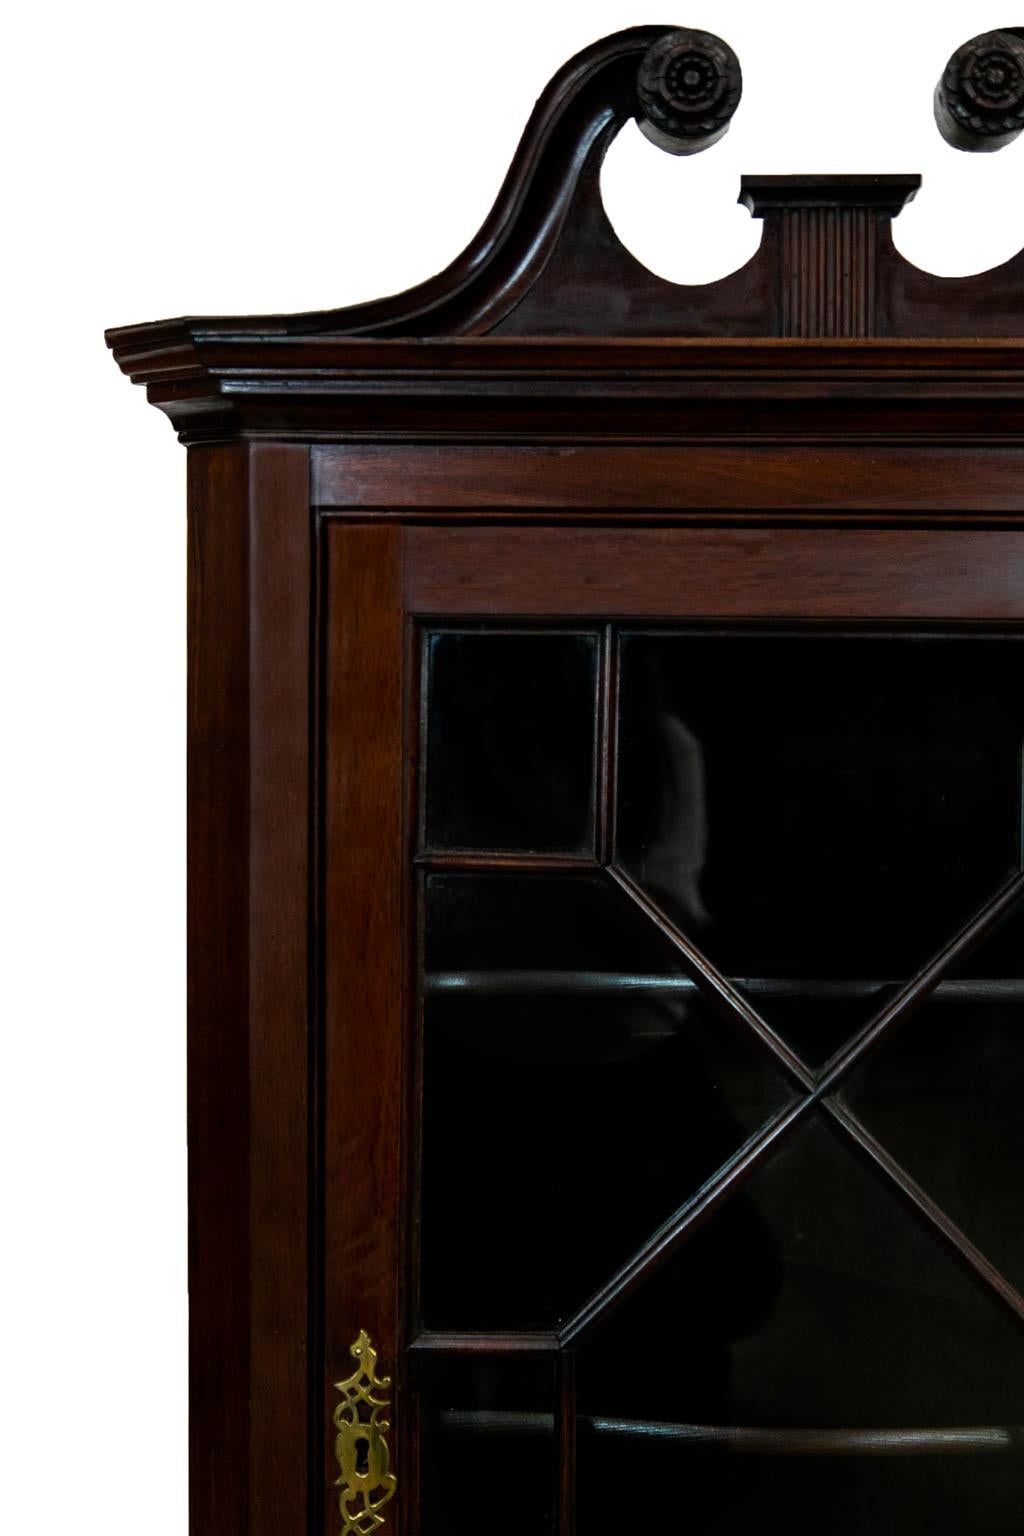 The top of this mahogany corner cupboard has the original broken arch pediment with carved floral rosettes in a fluted central plinth. The door has a classic thirteen pane window arrangement with the original wavy blown glass panes. There are three